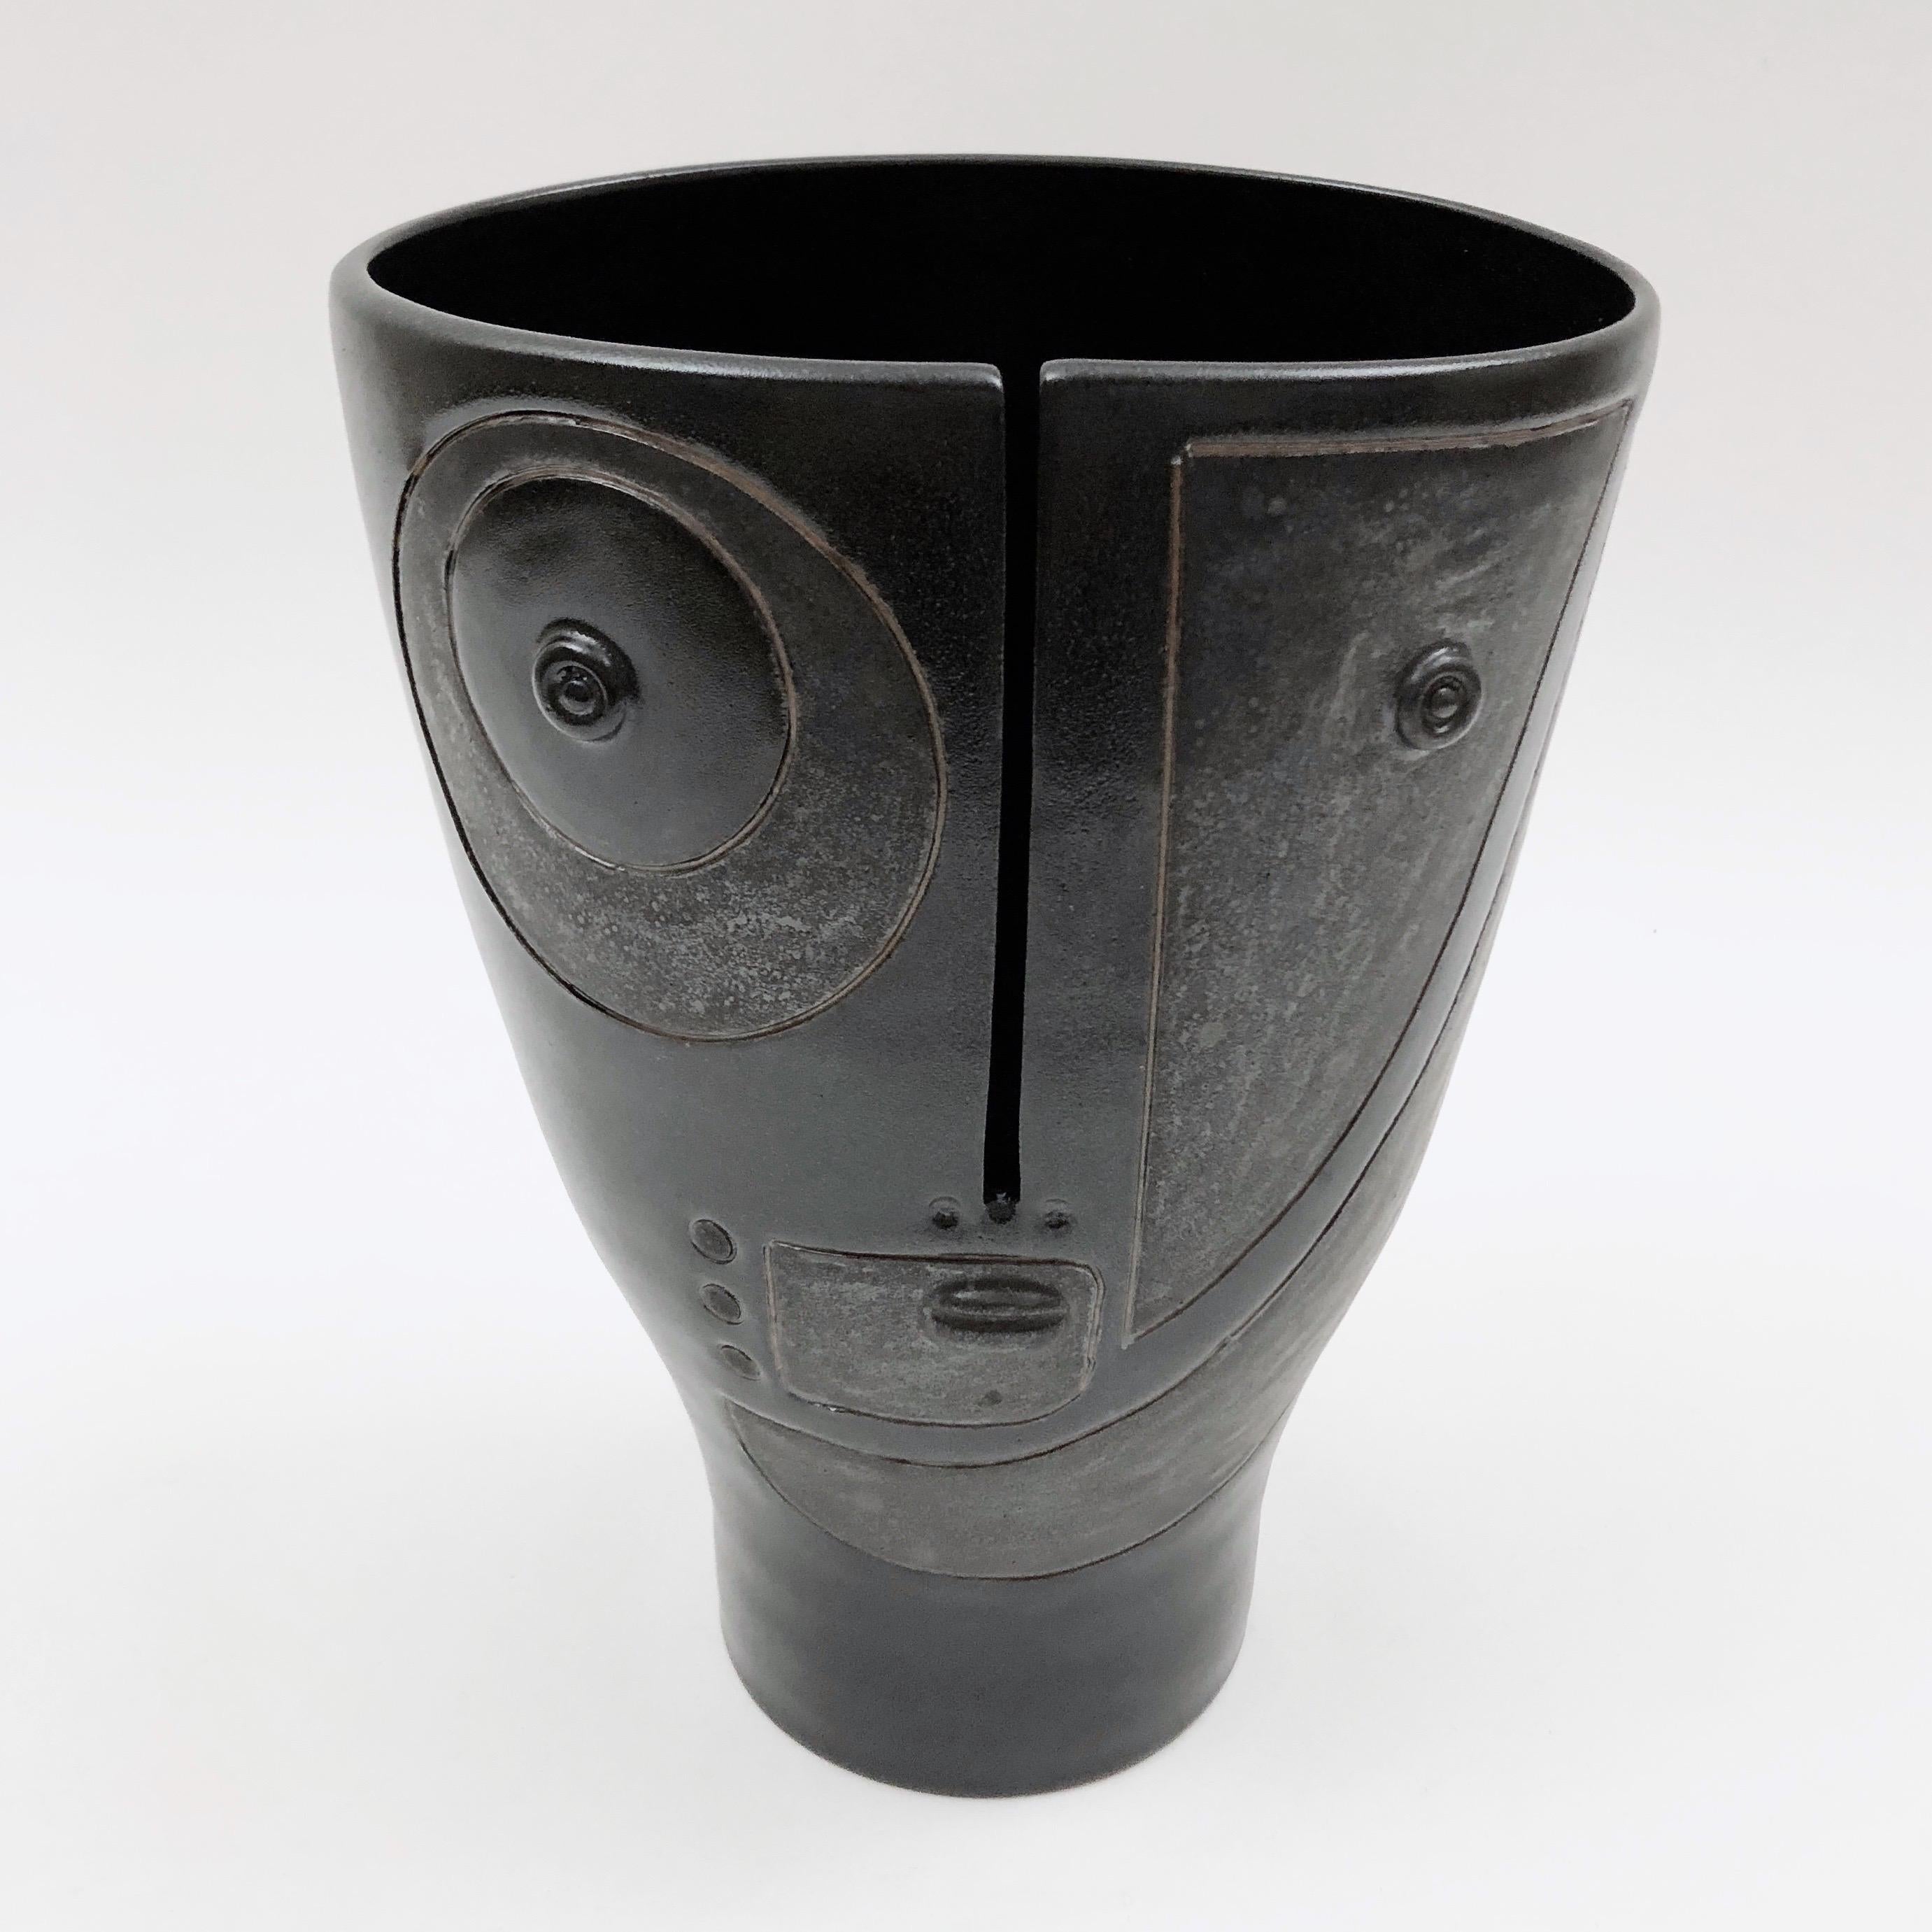 Figurative vase, called Idole, ceramic enameled in black and cloudy dark grey, decorated with a stylized visage and abstract designs incised front. 
One of a kind and exclusive handmade piece, designed and signed by the French artists and